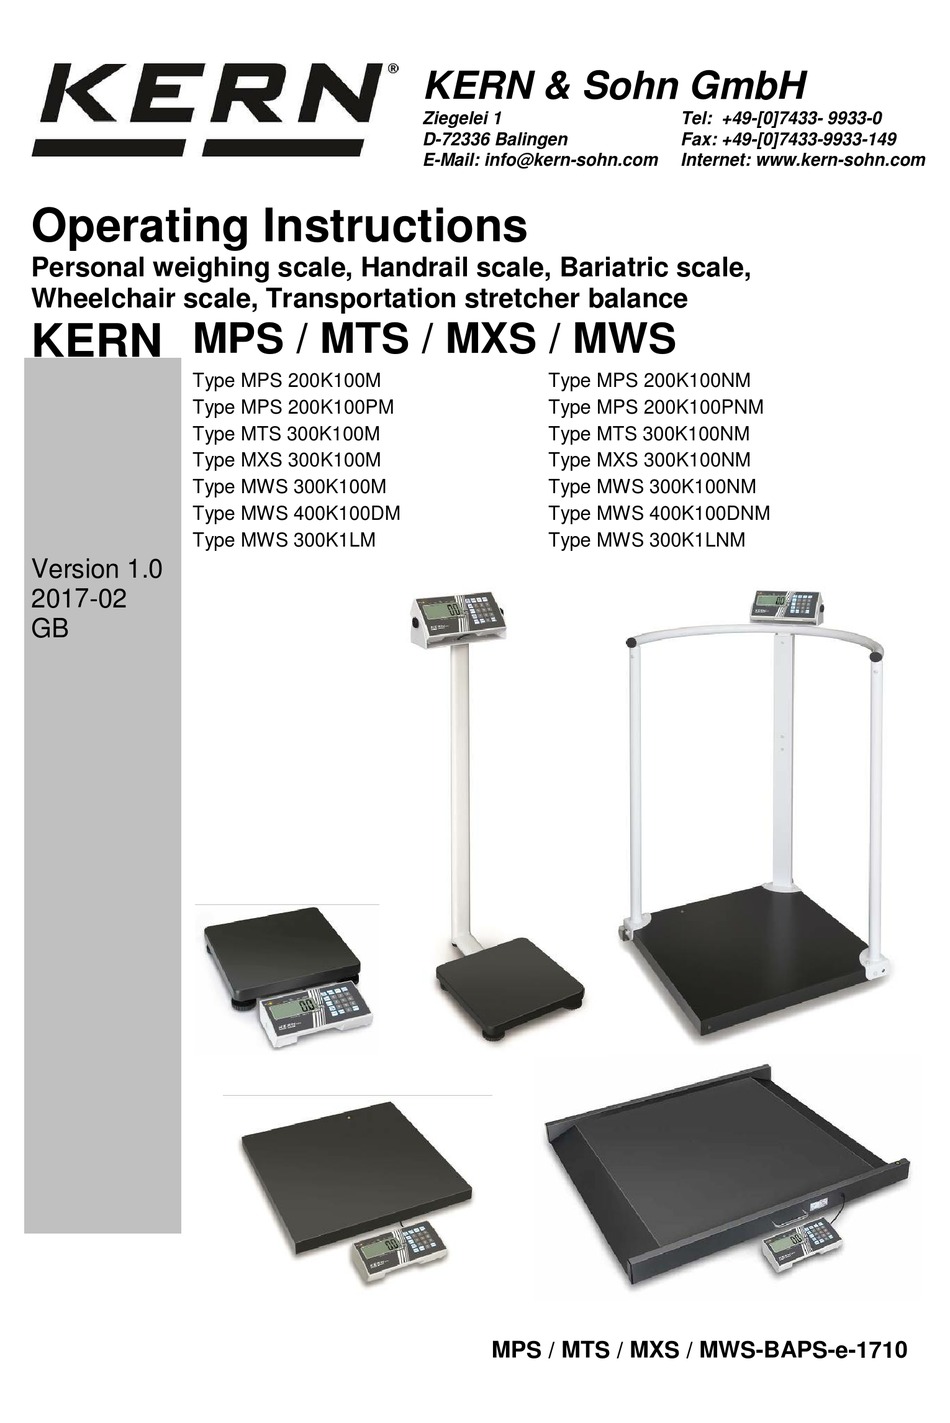 Kern professional personal scale MPS with calibration and medical approval